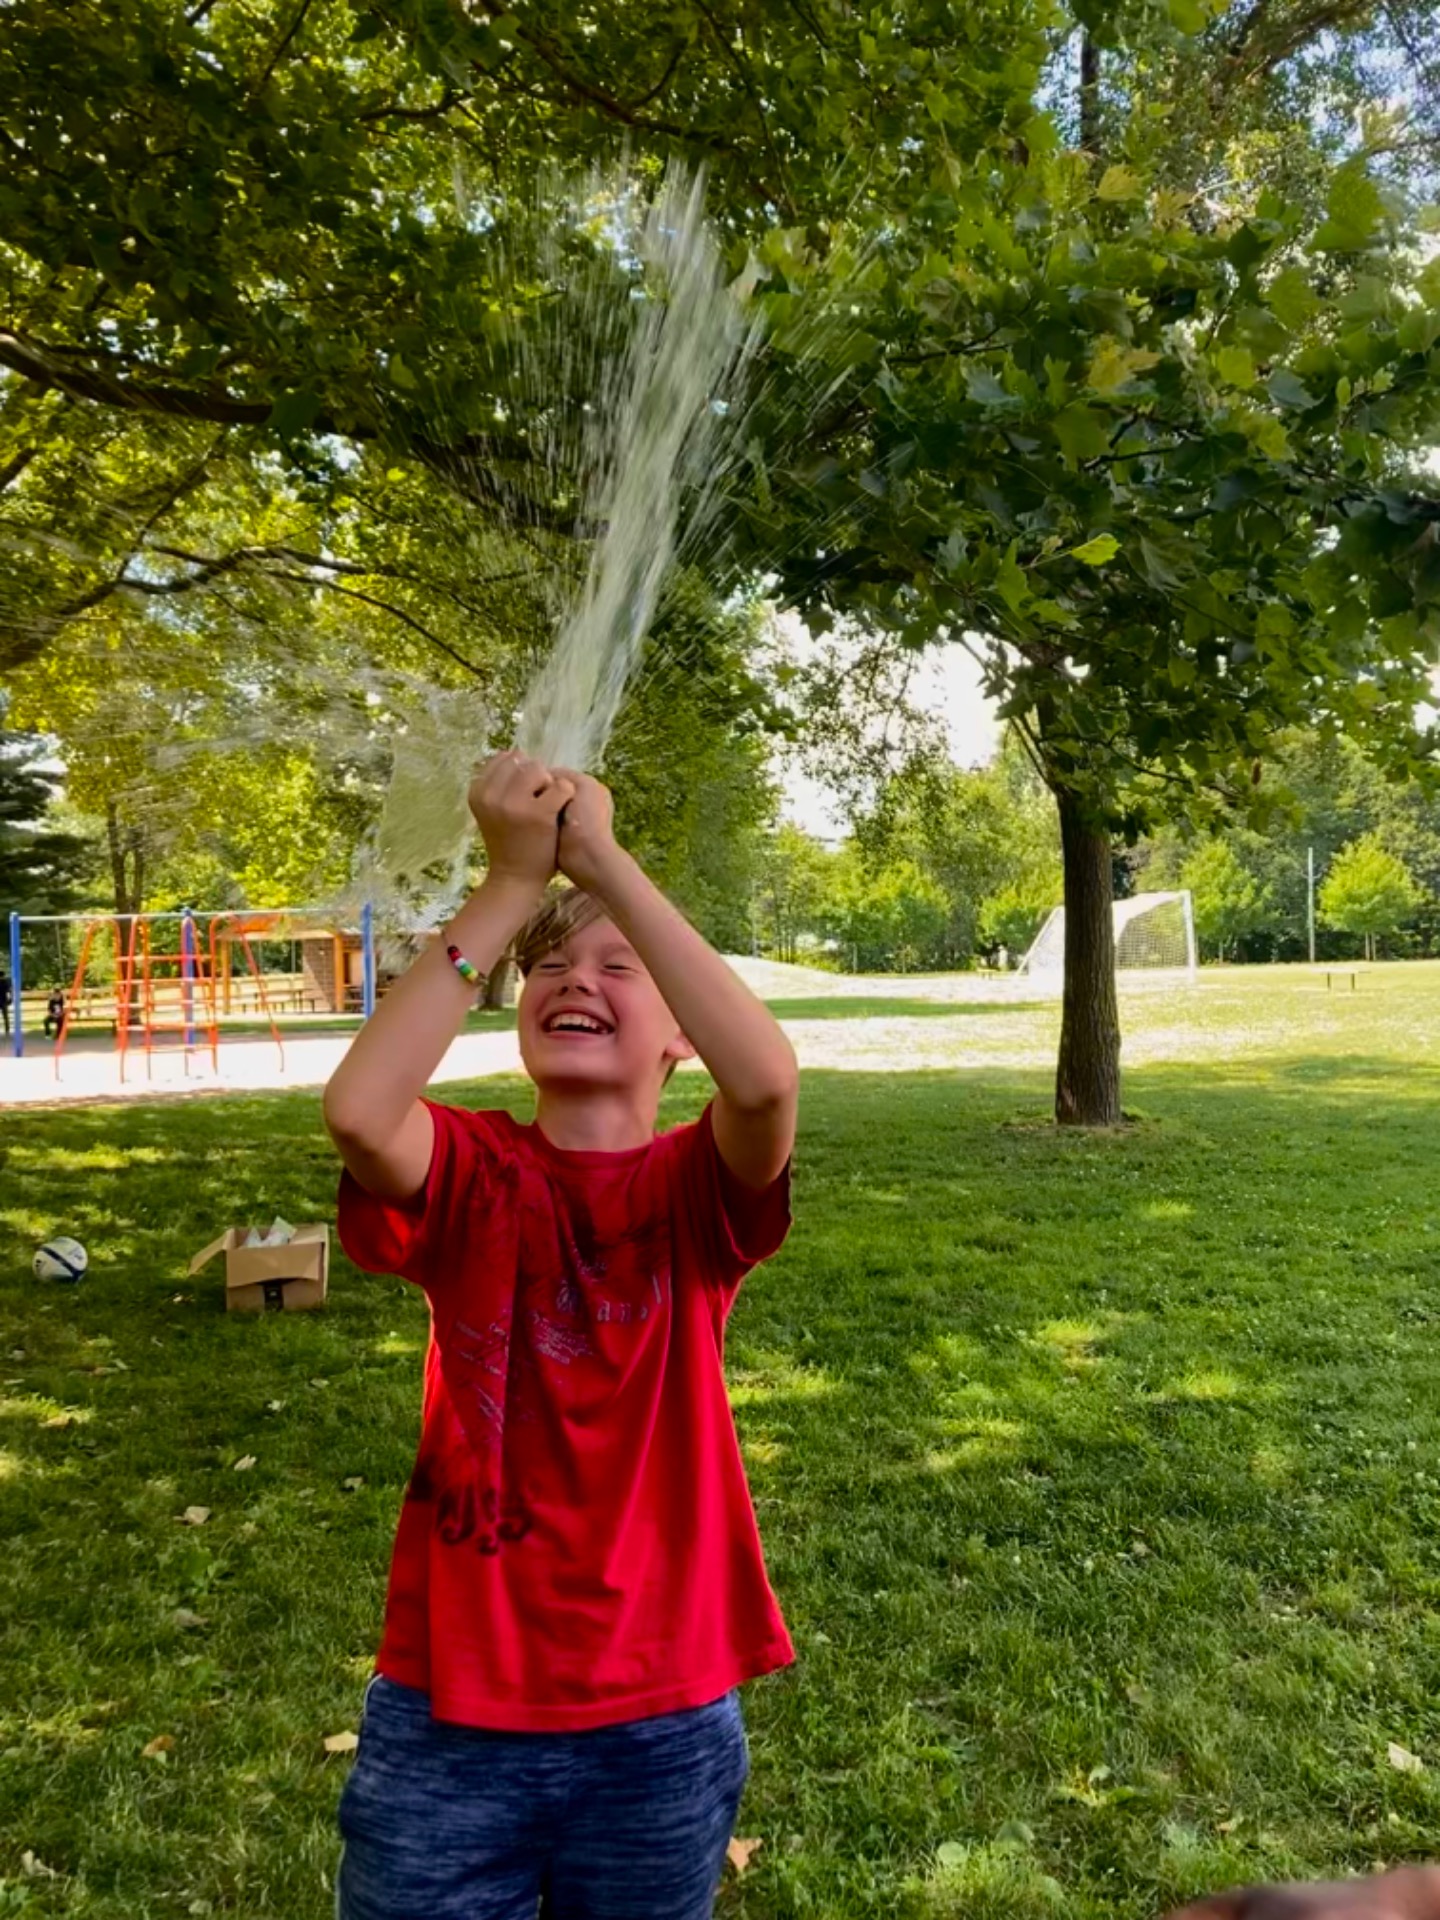 Water Balloon to the Head!